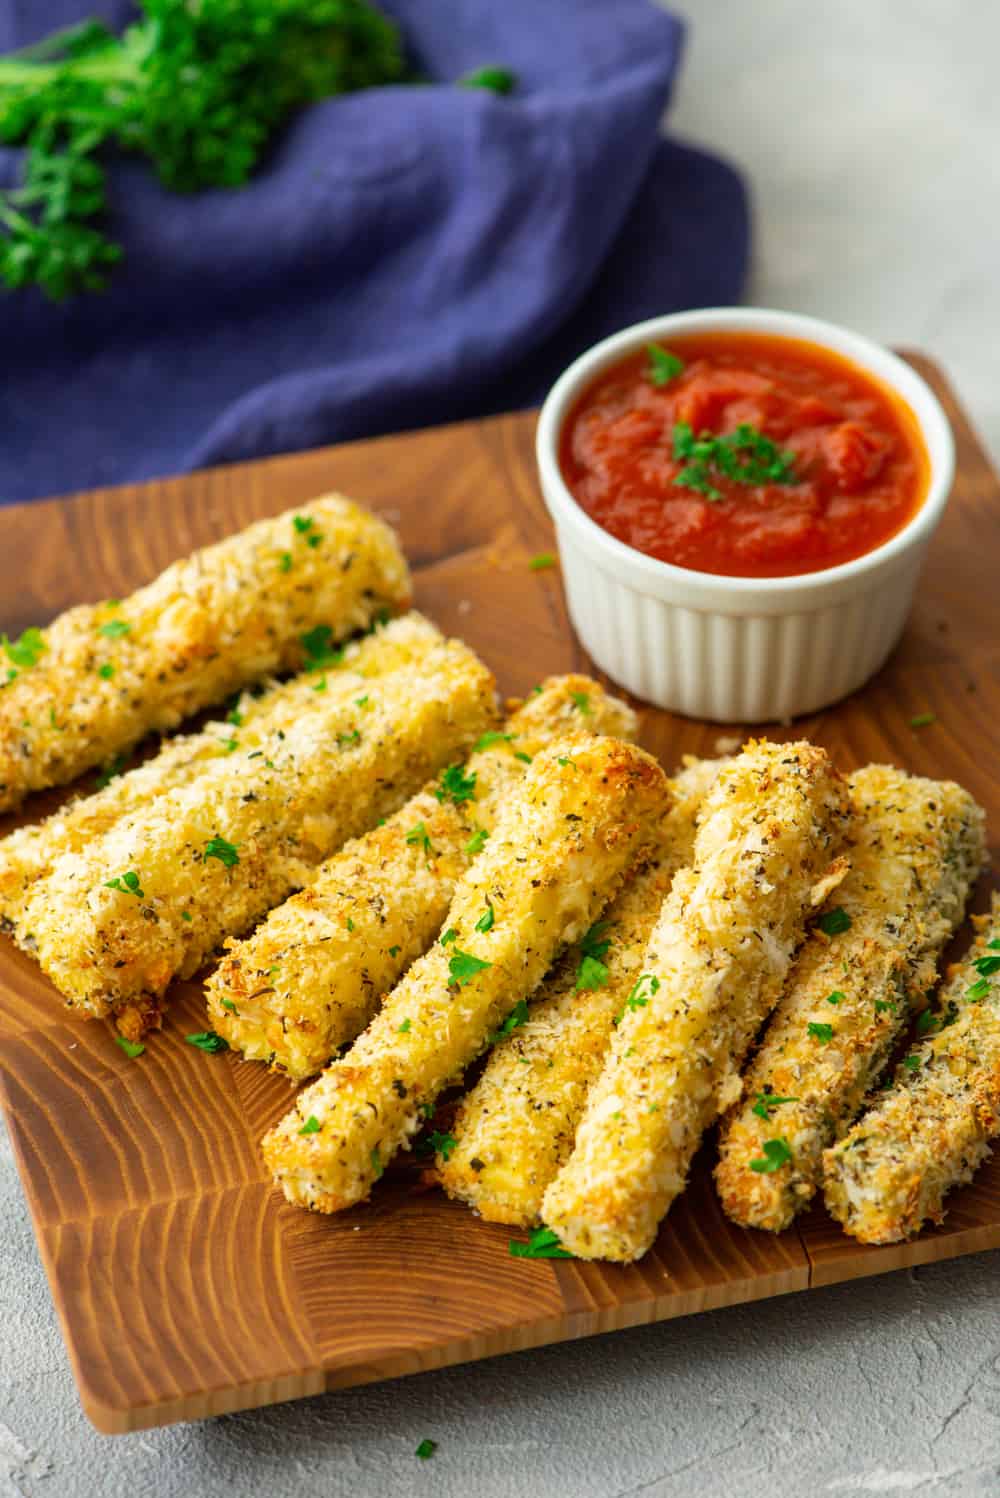 Baked zucchini fries with marinara sauce on the side